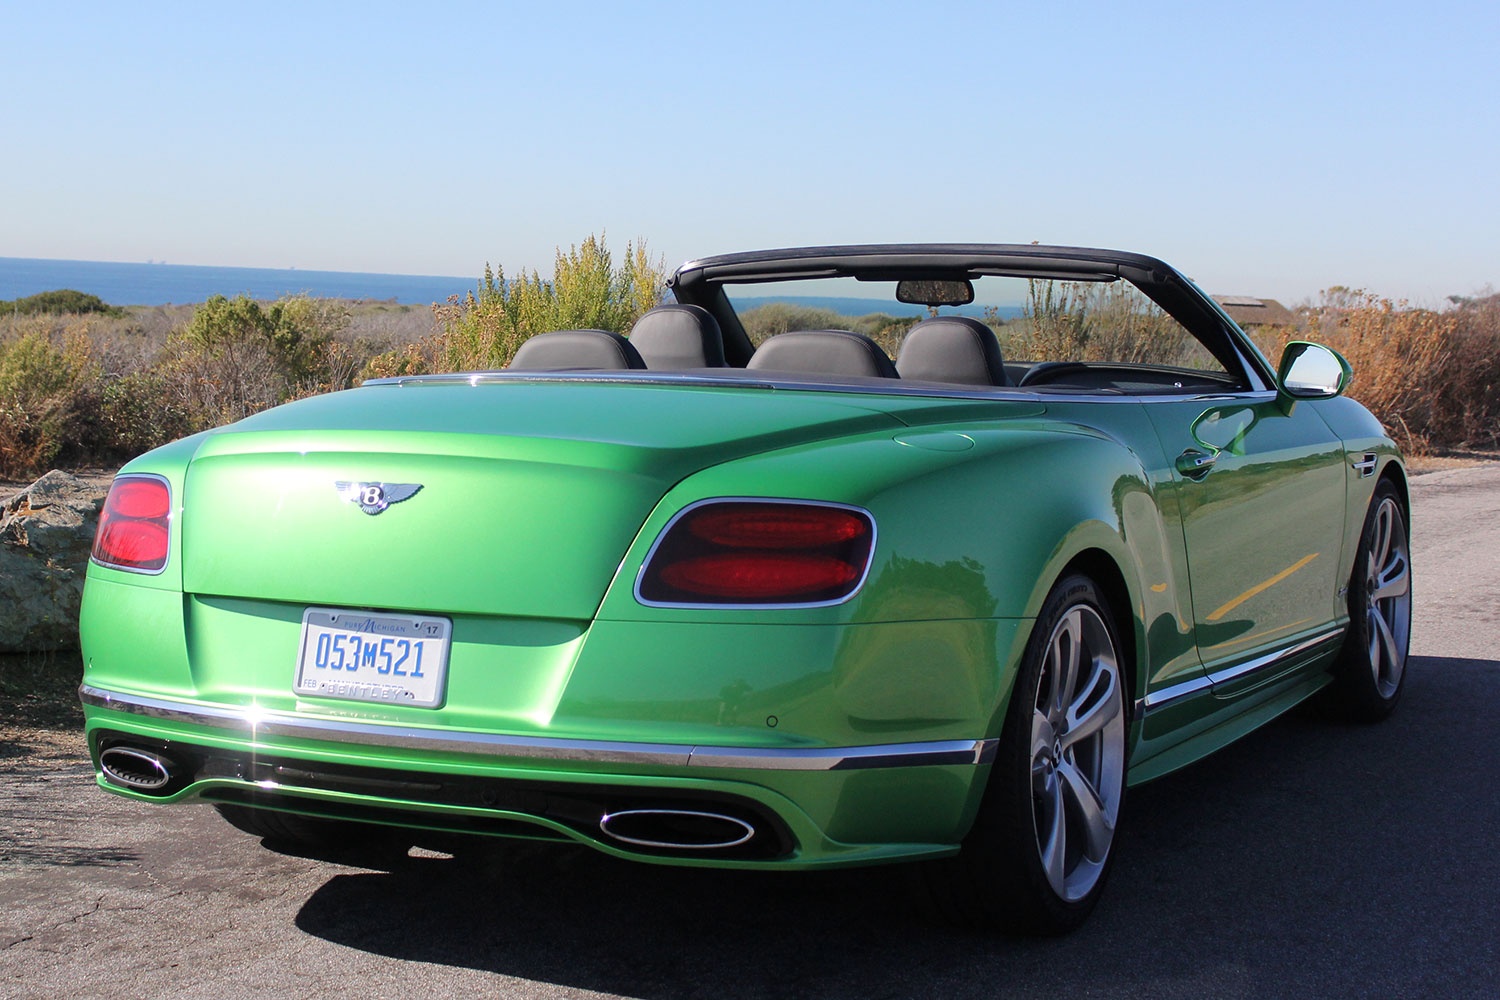 2016-bentley-continental-gtc-speed-back-angle-2-2-1500x1000